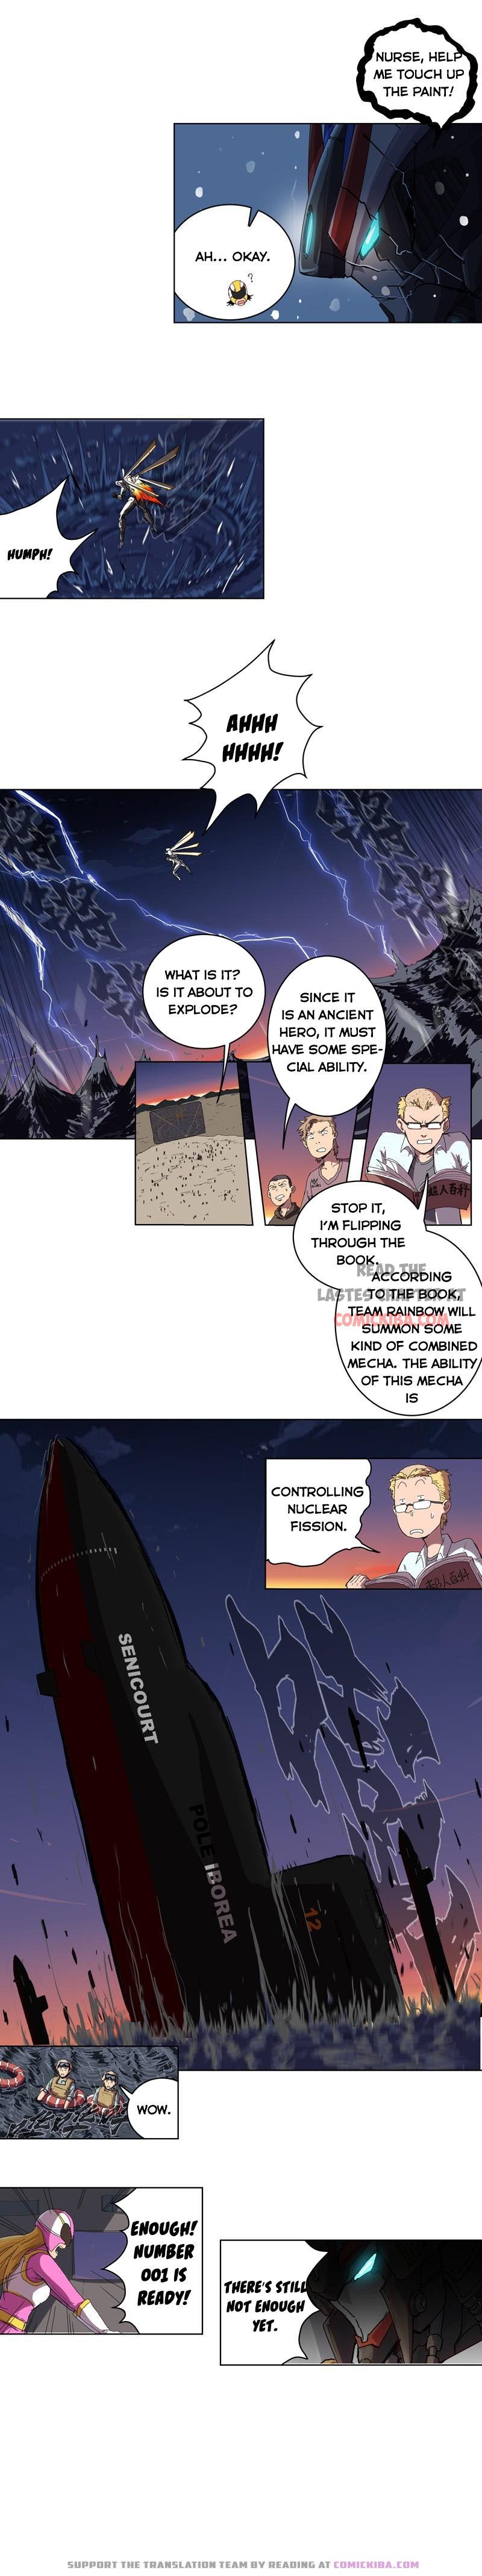 Cultivator Against Hero Society - Page 2